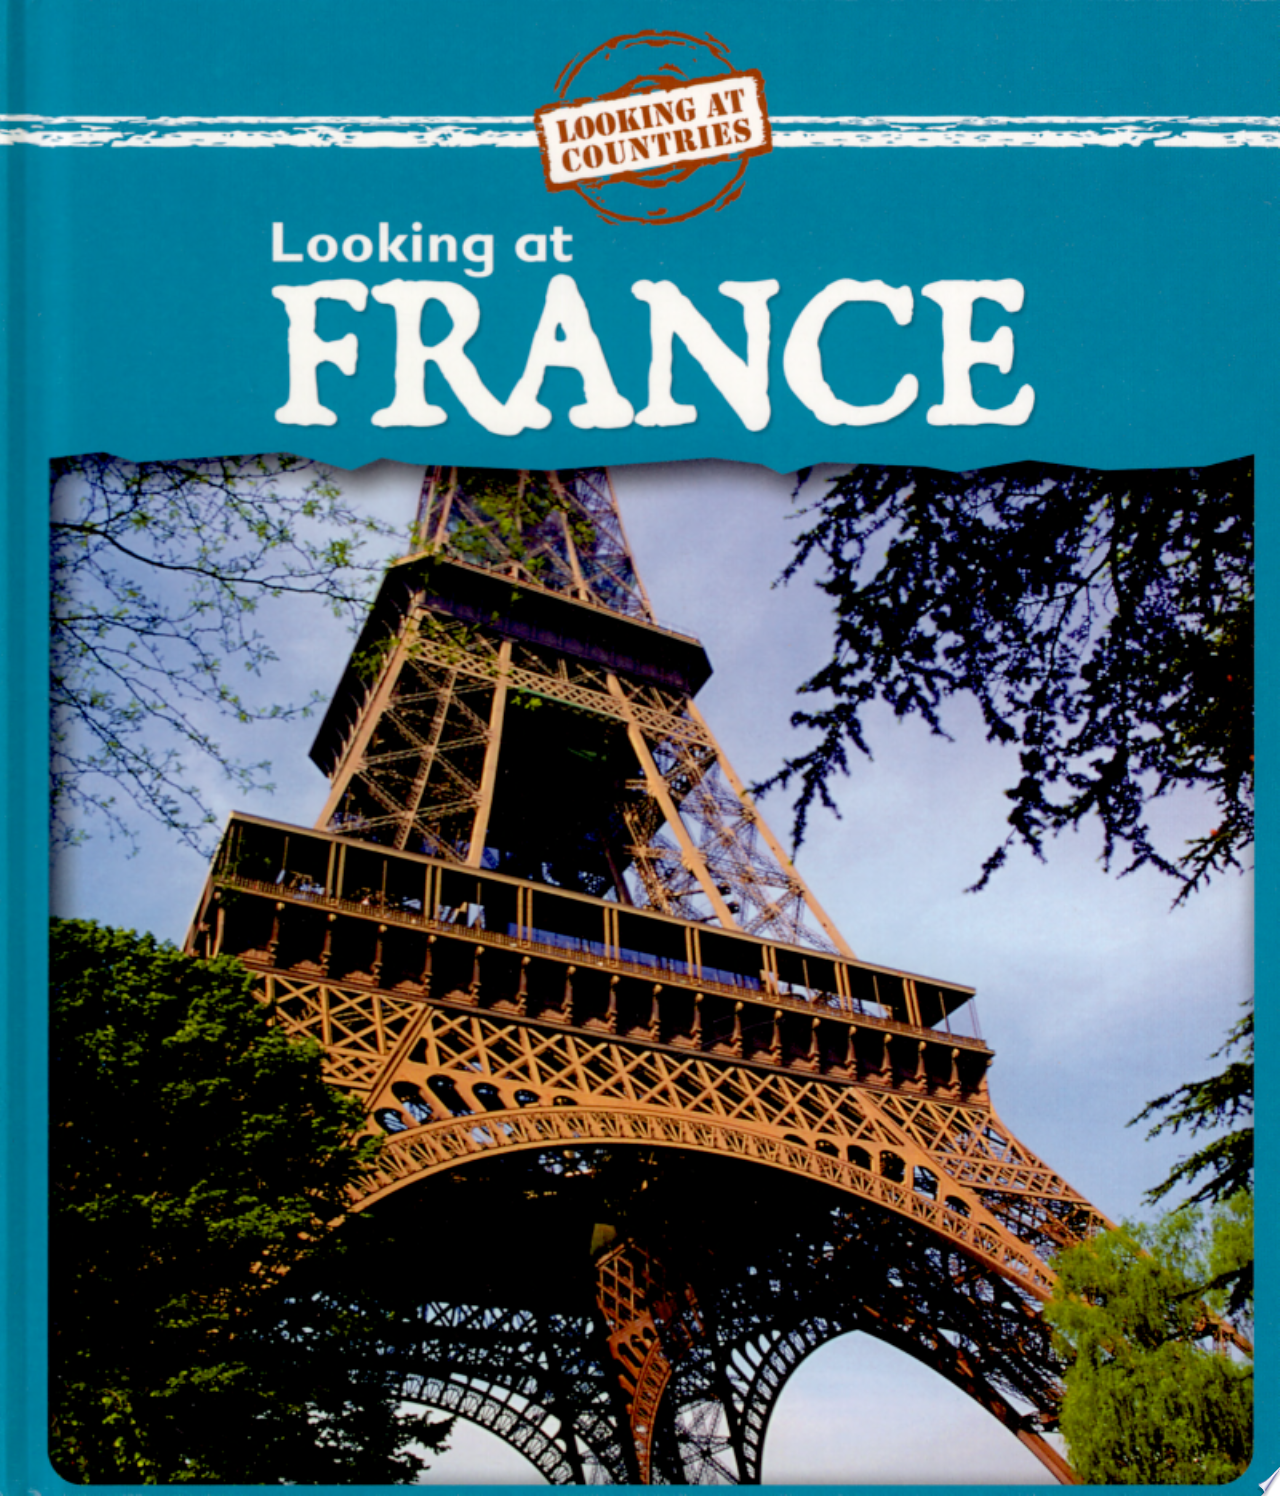 Image for "Looking at France"